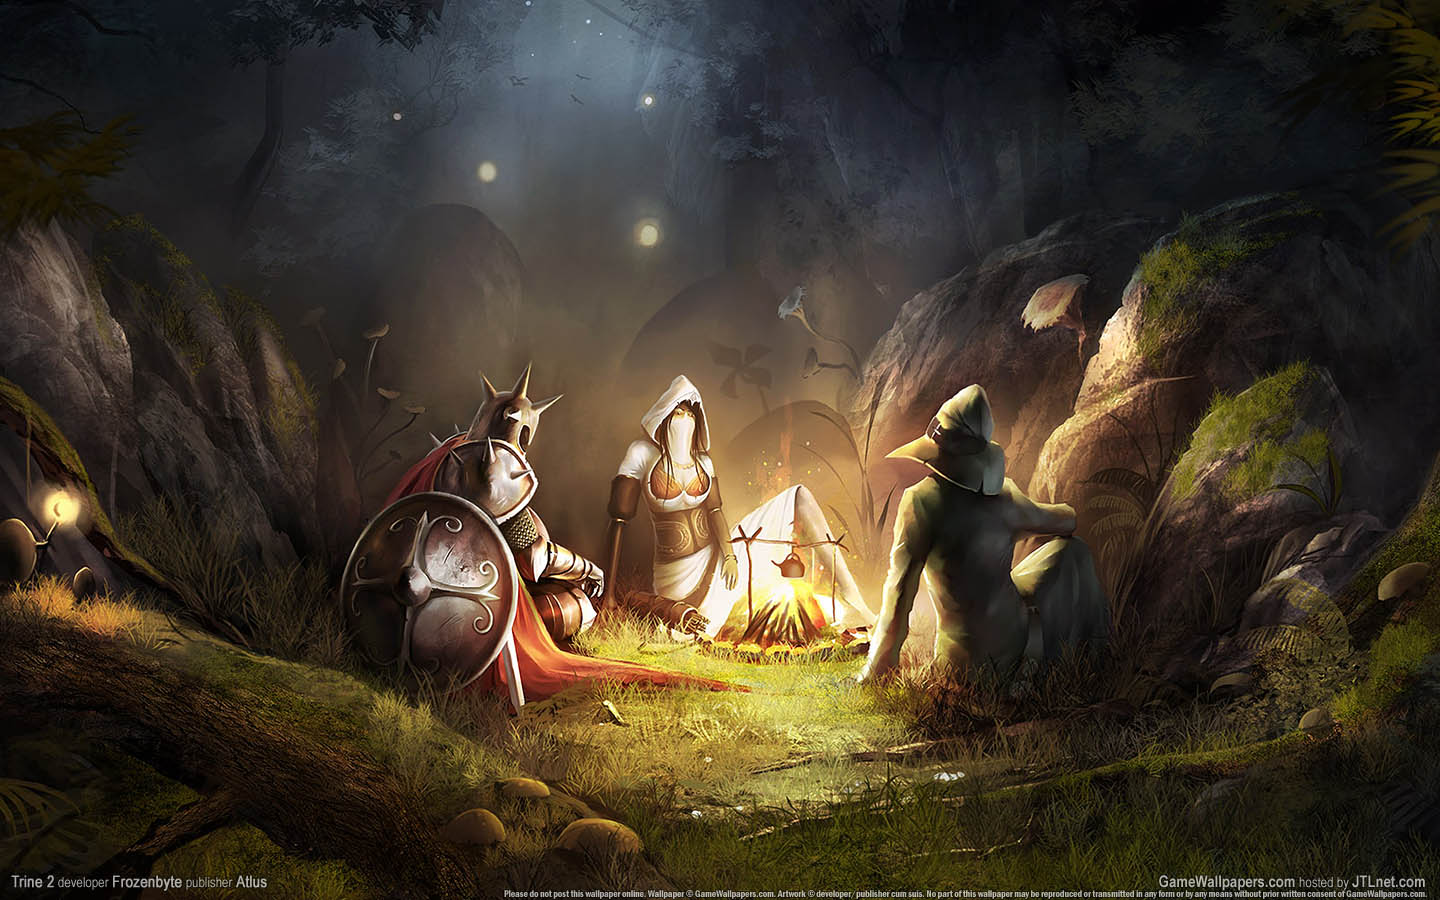 medieval wallpaper hd,action adventure game,strategy video game,adventure game,mythology,cg artwork